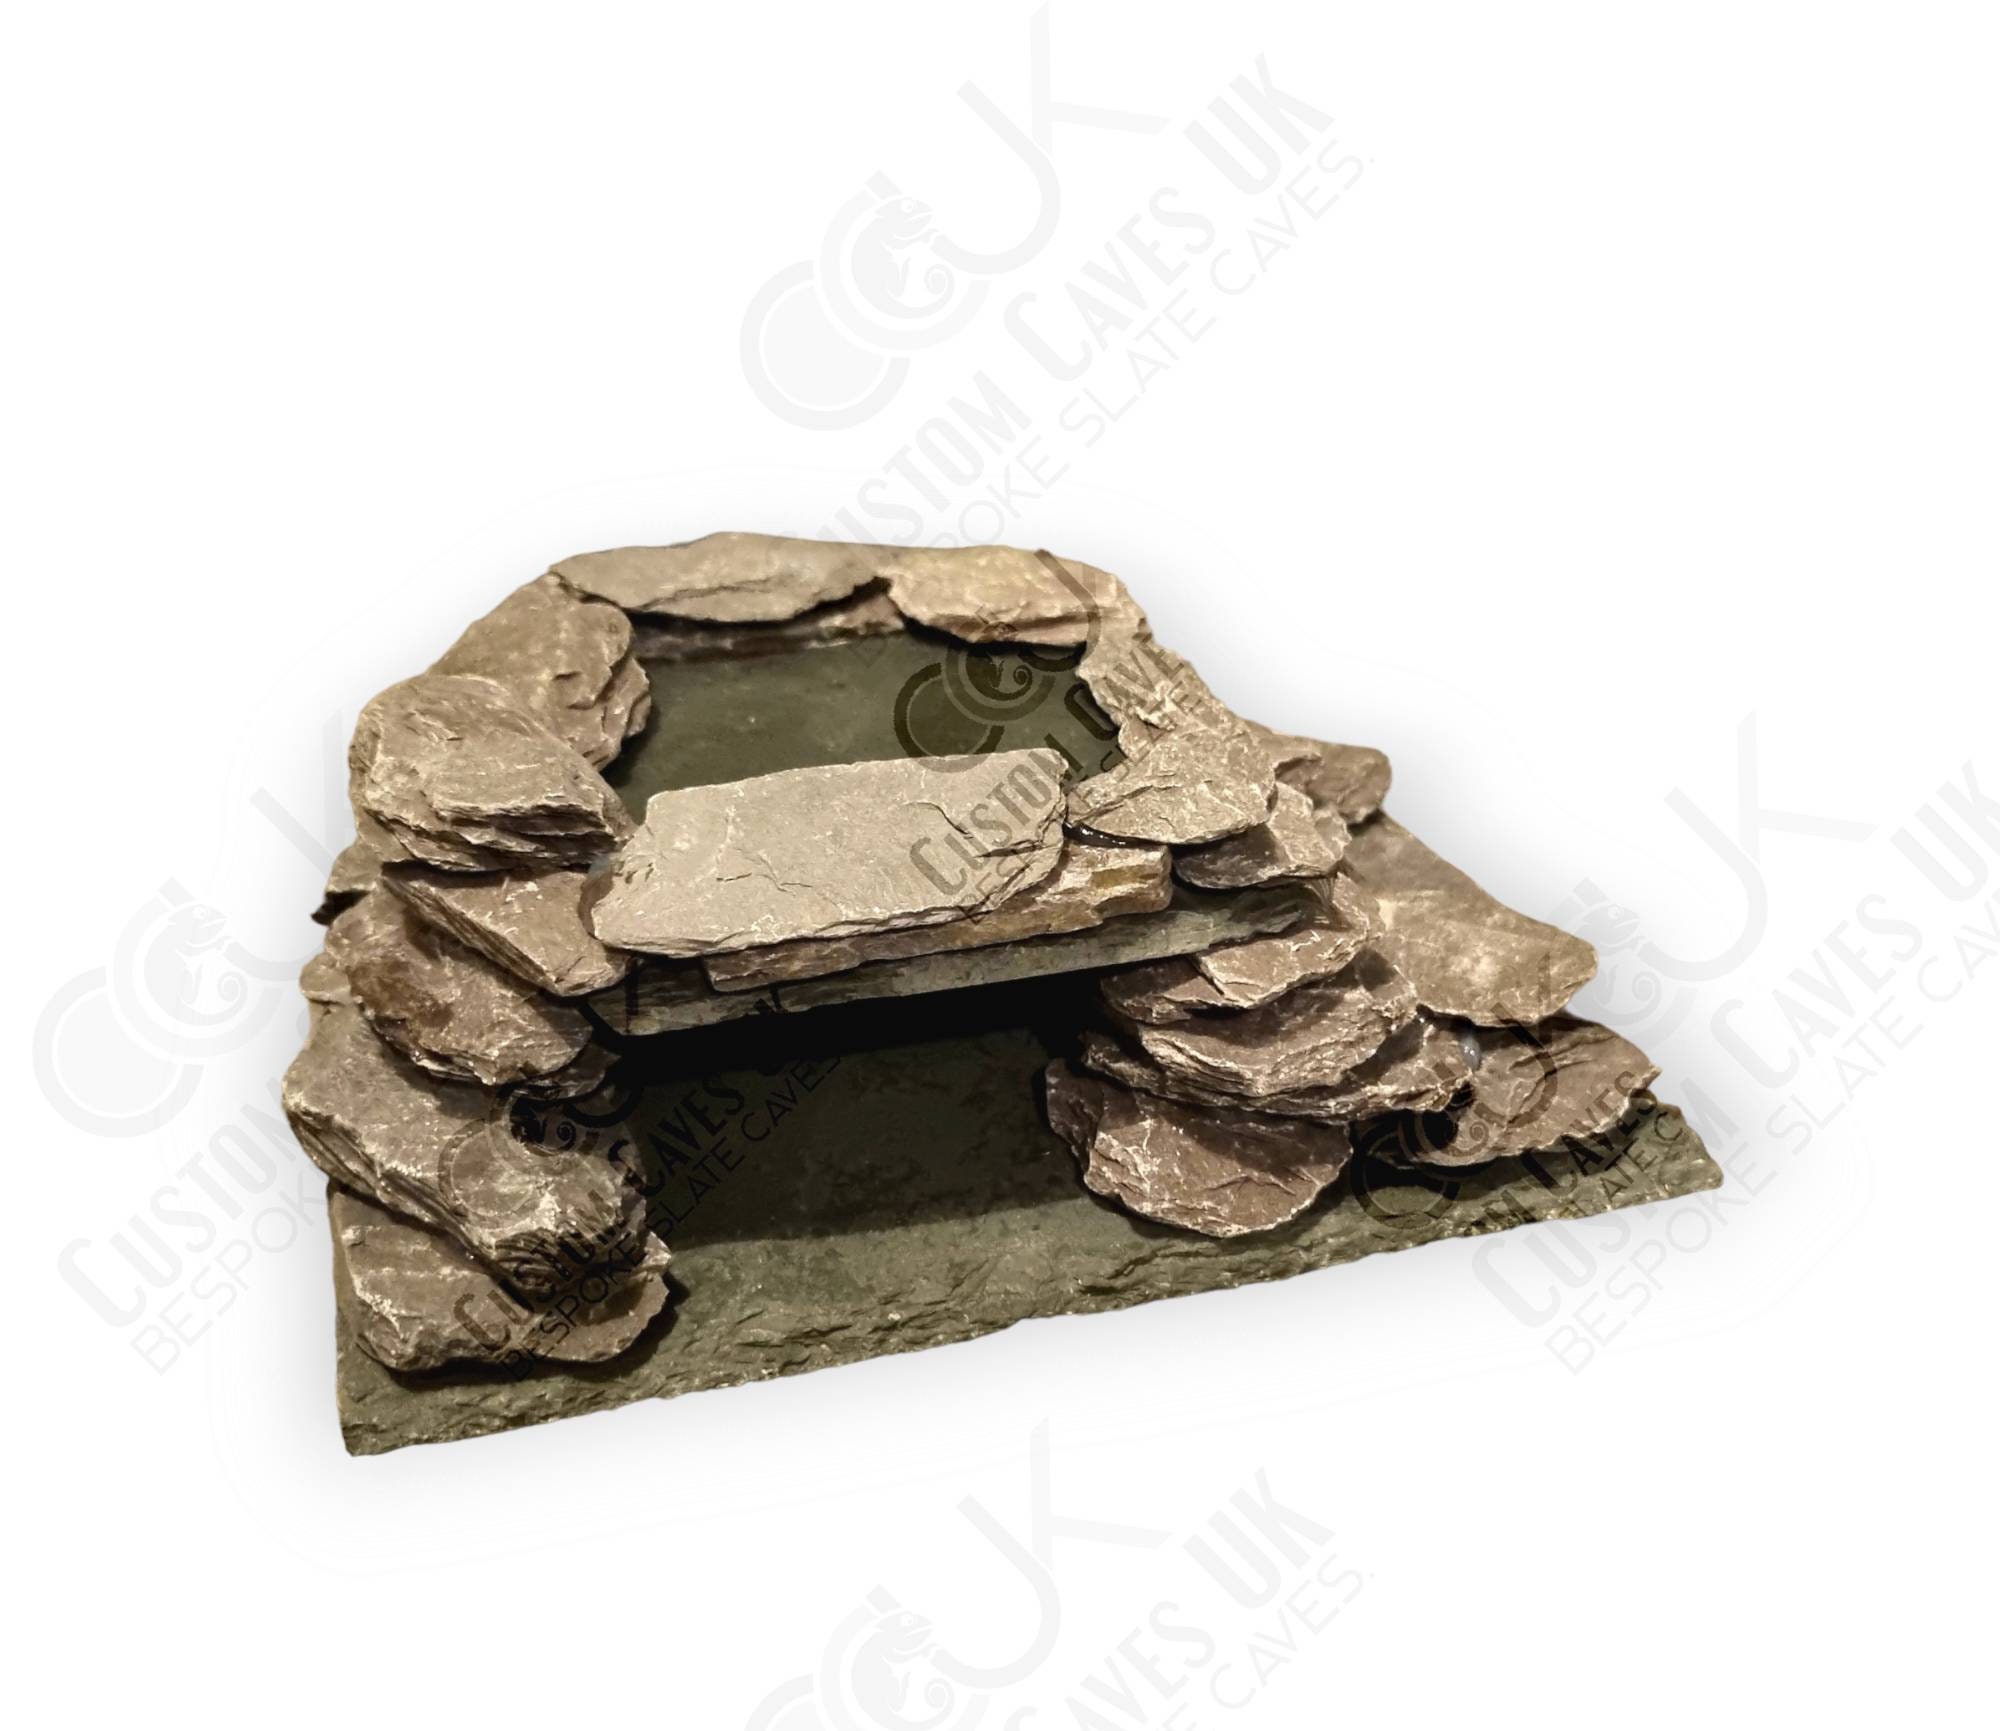 This is my new leopard geckos naturalistic set up. I used excavator clay to  make a túnel and a hide, I used a solid rock hide which will retain the  heat from